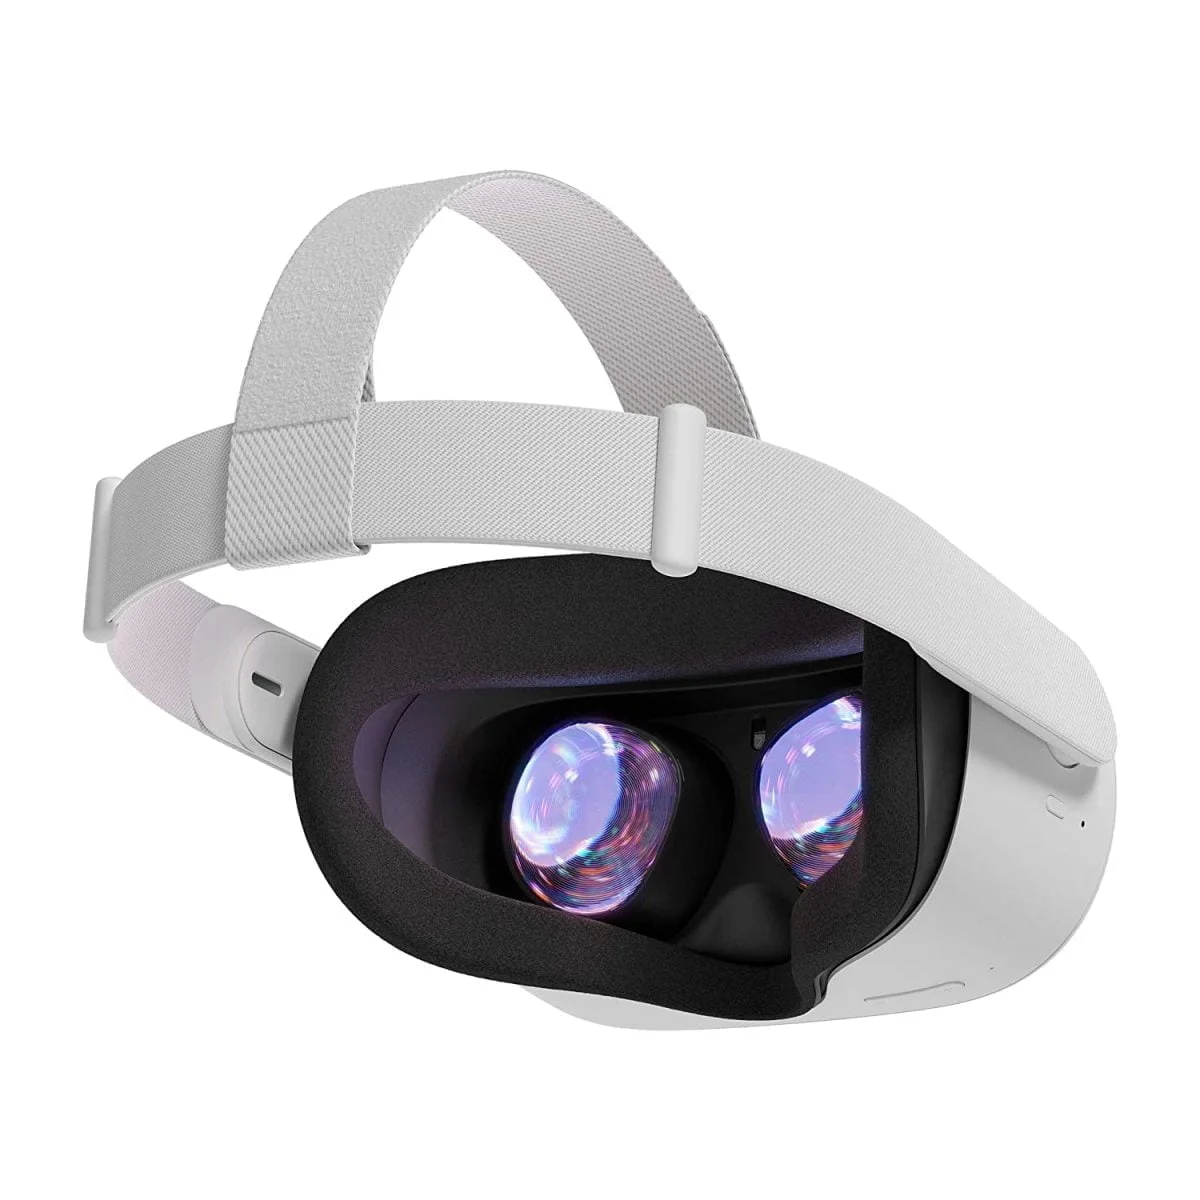 71Jernqxol. Sl1500 Oculus &Lt;H1&Gt;Meta Quest 2 128 Gb Advanced All-In-One Virtual Reality Headset&Lt;/H1&Gt; Https://Youtu.be/Atvgl9Wojsm &Lt;Ul Class=&Quot;A-Unordered-List A-Vertical A-Spacing-Mini&Quot;&Gt; &Lt;Li&Gt;&Lt;Span Class=&Quot;A-List-Item&Quot;&Gt;Voltage: 100-240 V&Lt;/Span&Gt;&Lt;/Li&Gt; &Lt;Li&Gt;&Lt;Span Class=&Quot;A-List-Item&Quot;&Gt;Next-Level Hardware - Make Every Move Count With A Blazing-Fast Processor And Our Highest-Resolution Display&Lt;/Span&Gt;&Lt;/Li&Gt; &Lt;Li&Gt;&Lt;Span Class=&Quot;A-List-Item&Quot;&Gt;All-In-One Gaming - With Backward Compatibility, You Can Explore New Titles And Old Favorites In The Expansive Quest Content Library&Lt;/Span&Gt;&Lt;/Li&Gt; &Lt;Li&Gt;&Lt;Span Class=&Quot;A-List-Item&Quot;&Gt;Immersive Entertainment - Get The Best Seat In The House To Live Concerts, Groundbreaking Films, Exclusive Events And More&Lt;/Span&Gt;&Lt;/Li&Gt; &Lt;Li&Gt;&Lt;Span Class=&Quot;A-List-Item&Quot;&Gt;Easy Setup - Just Open The Box, Set Up With The Smartphone App And Jump Into Vr. No Pc Or Console Needed. Requires Wireless Internet Access And The Oculus App (Free Download) To Set Up Device Premium Display - Catch Every Detail With A Stunning Display That Features 50% More Pixels Than The Original Quest Ultimate Control - Redesigned Oculus Touch Controllers Transport Your Movements Directly Into Vr With Intuitive Controls Pc Vr Compatible - Step Into Incredible Oculus Rift Titles By Connecting An Oculus Link Cable To A Compatible Gaming Pc. Oculus Link Cable Sold Separately 3D Cinematic Sound - Hear In All Directions With Built-In Speakers That Deliver Cinematic 3D Positional Audio&Lt;/Span&Gt;&Lt;/Li&Gt; &Lt;/Ul&Gt; &Nbsp; Meta Quest 2 Meta Quest 2 128 Gb Advanced All-In-One Virtual Reality Headset